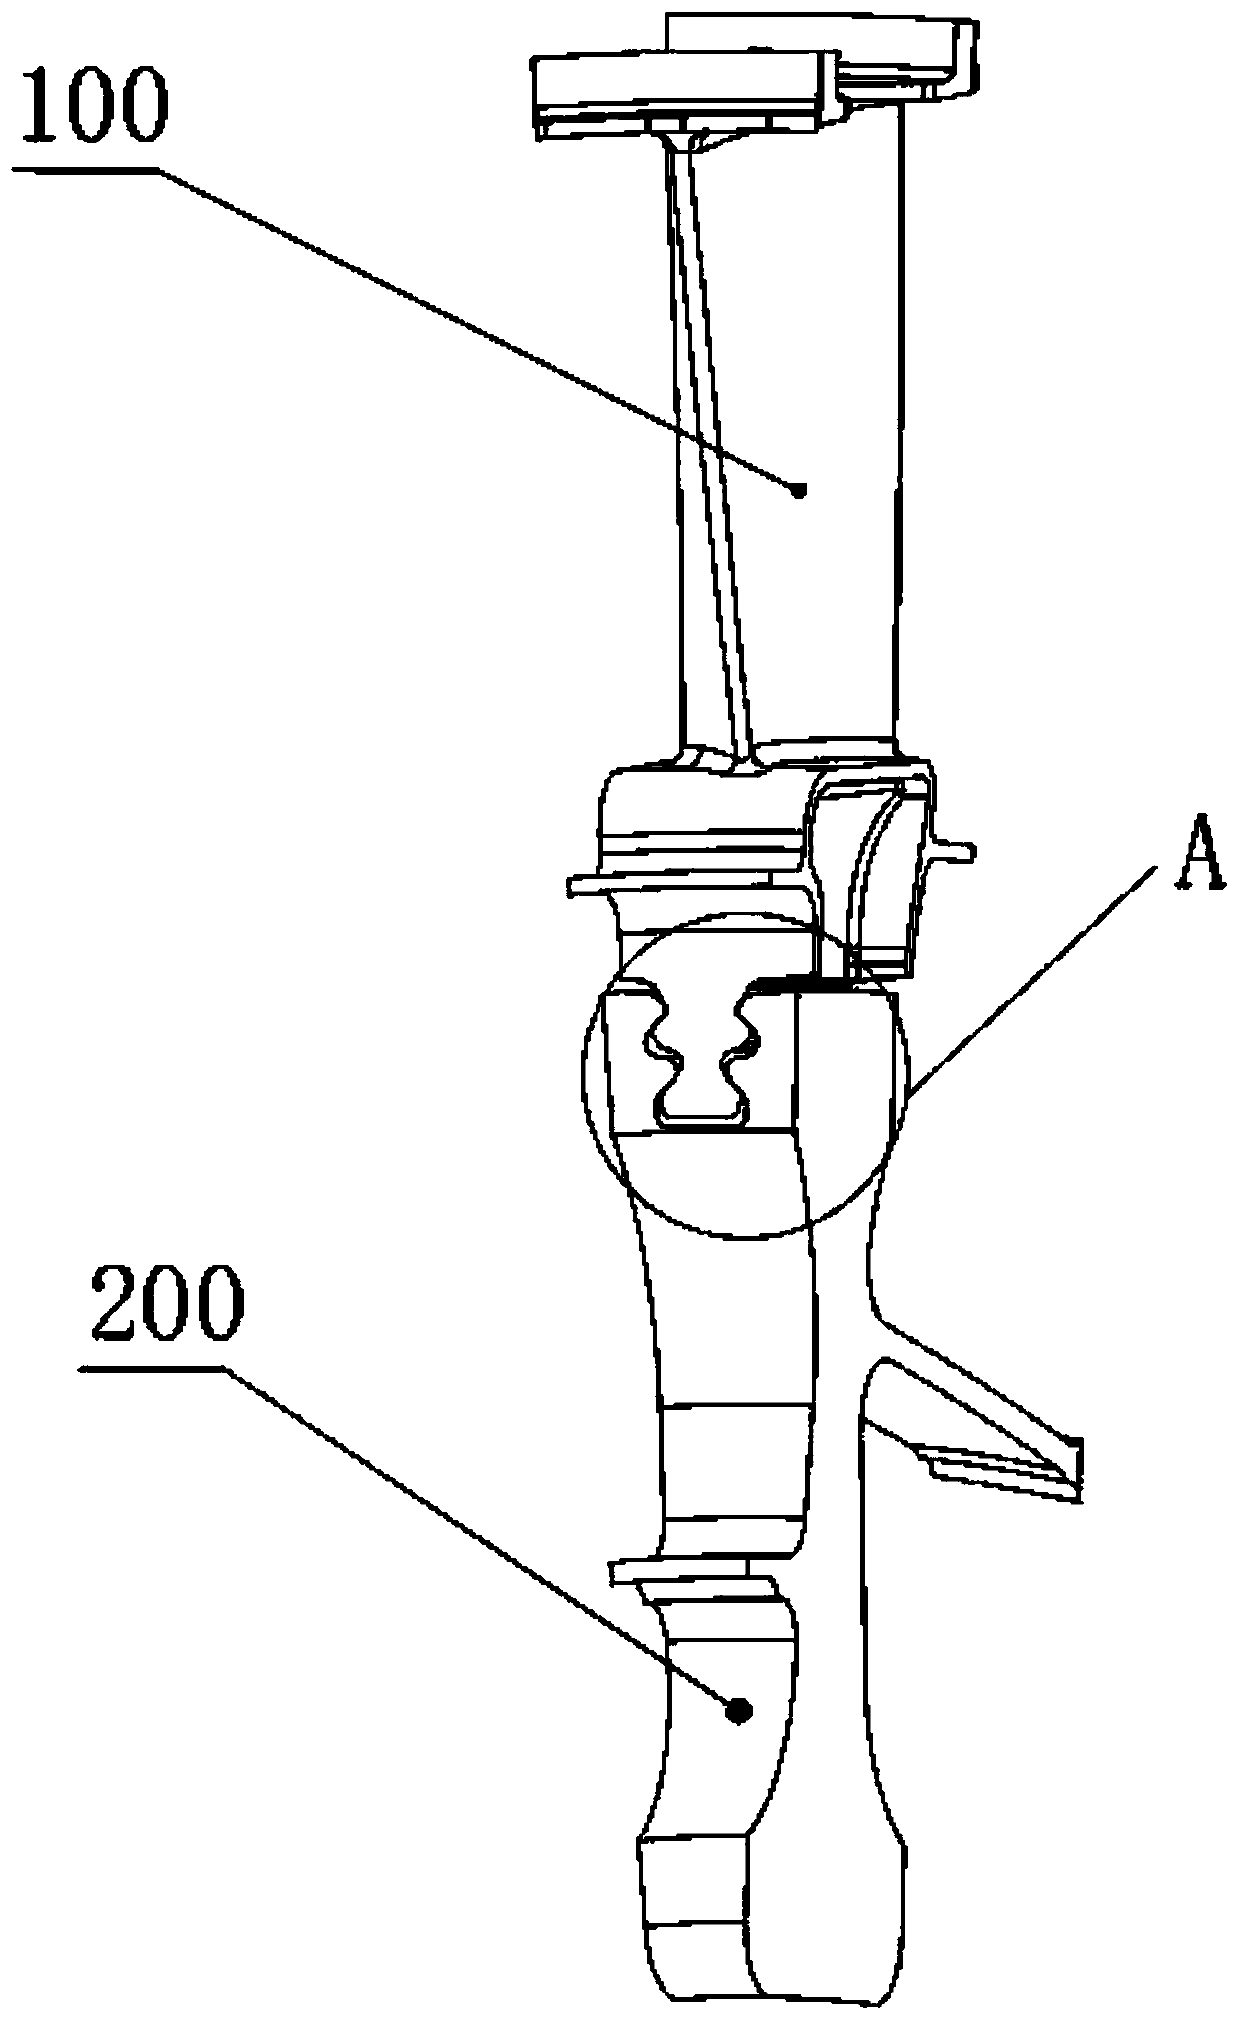 Fir-tree type disc tenon connecting device